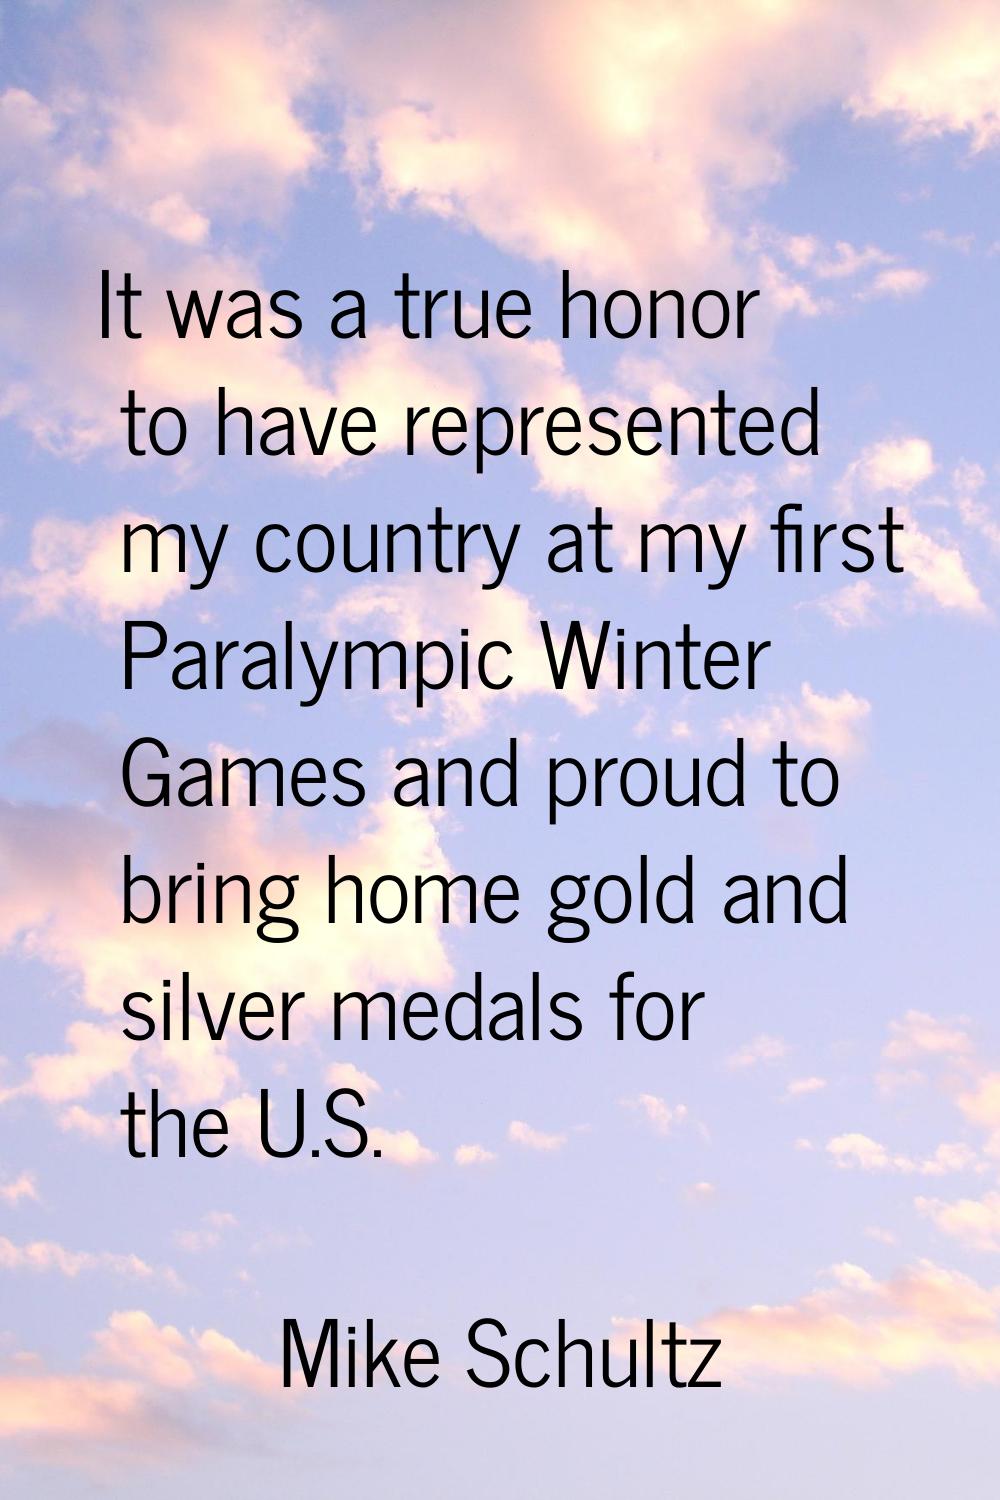 It was a true honor to have represented my country at my first Paralympic Winter Games and proud to